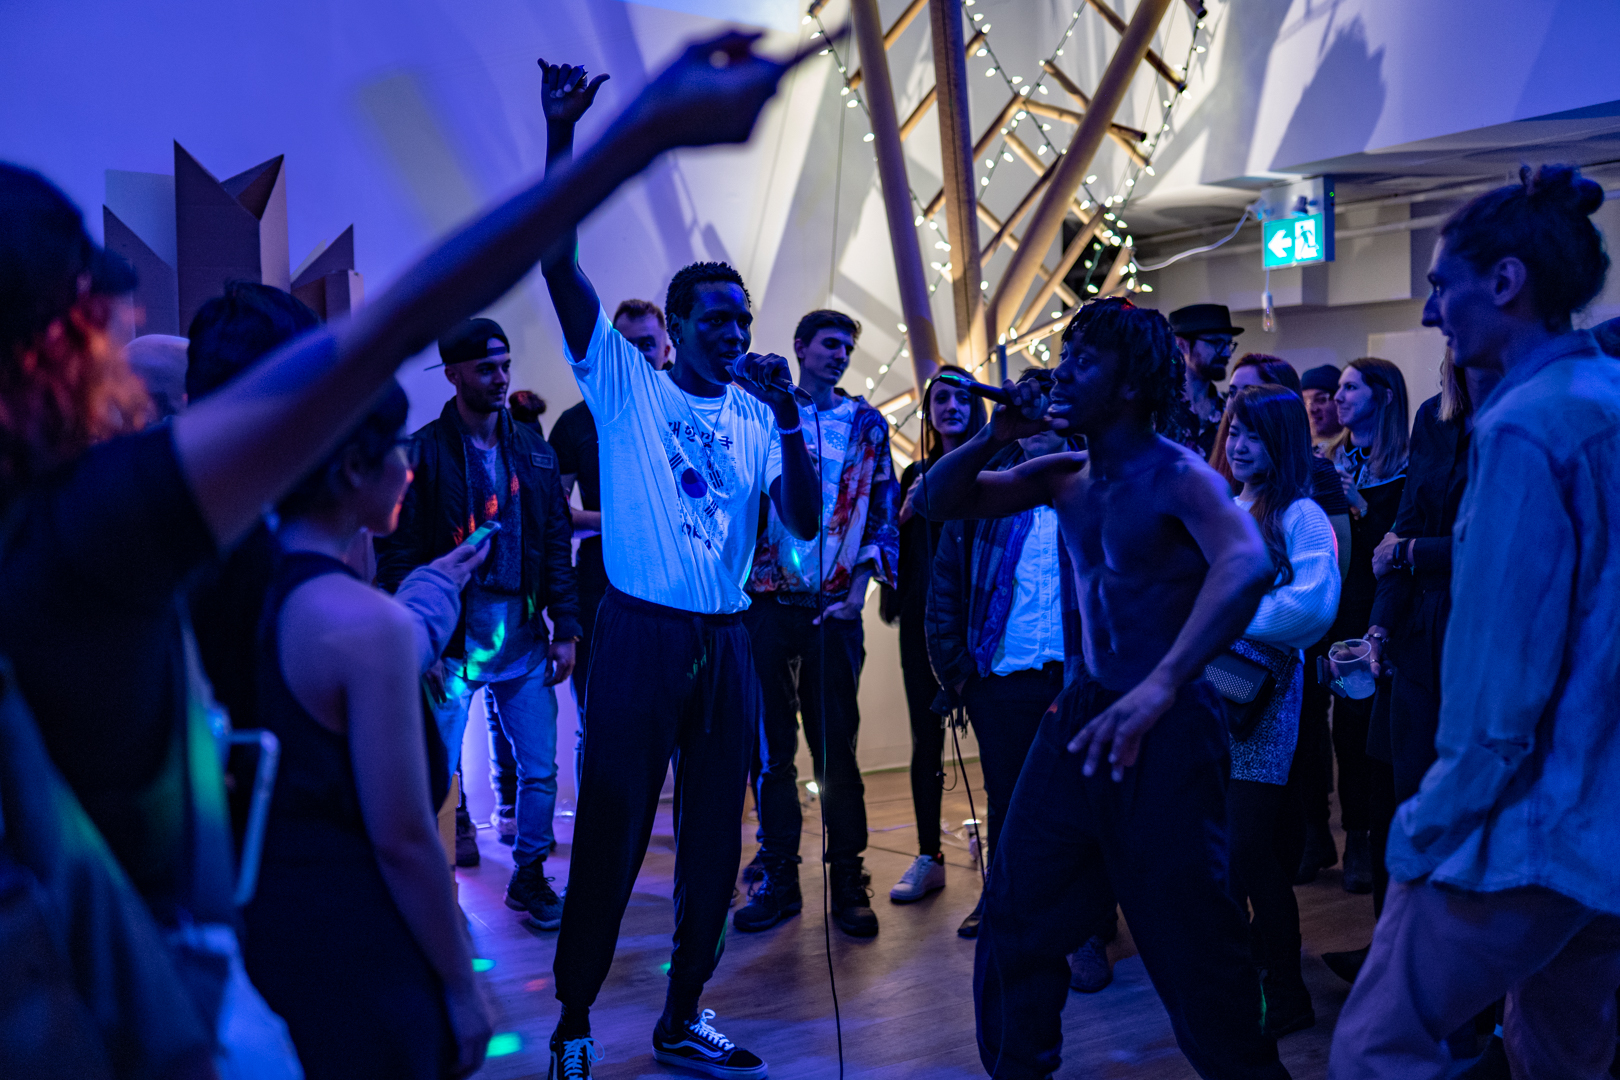 T.dot Bangerz Brass in front of Bucky’s DNA by Ron Wild and David at PULP art party 2019 - photo by Maiku Creative Productions